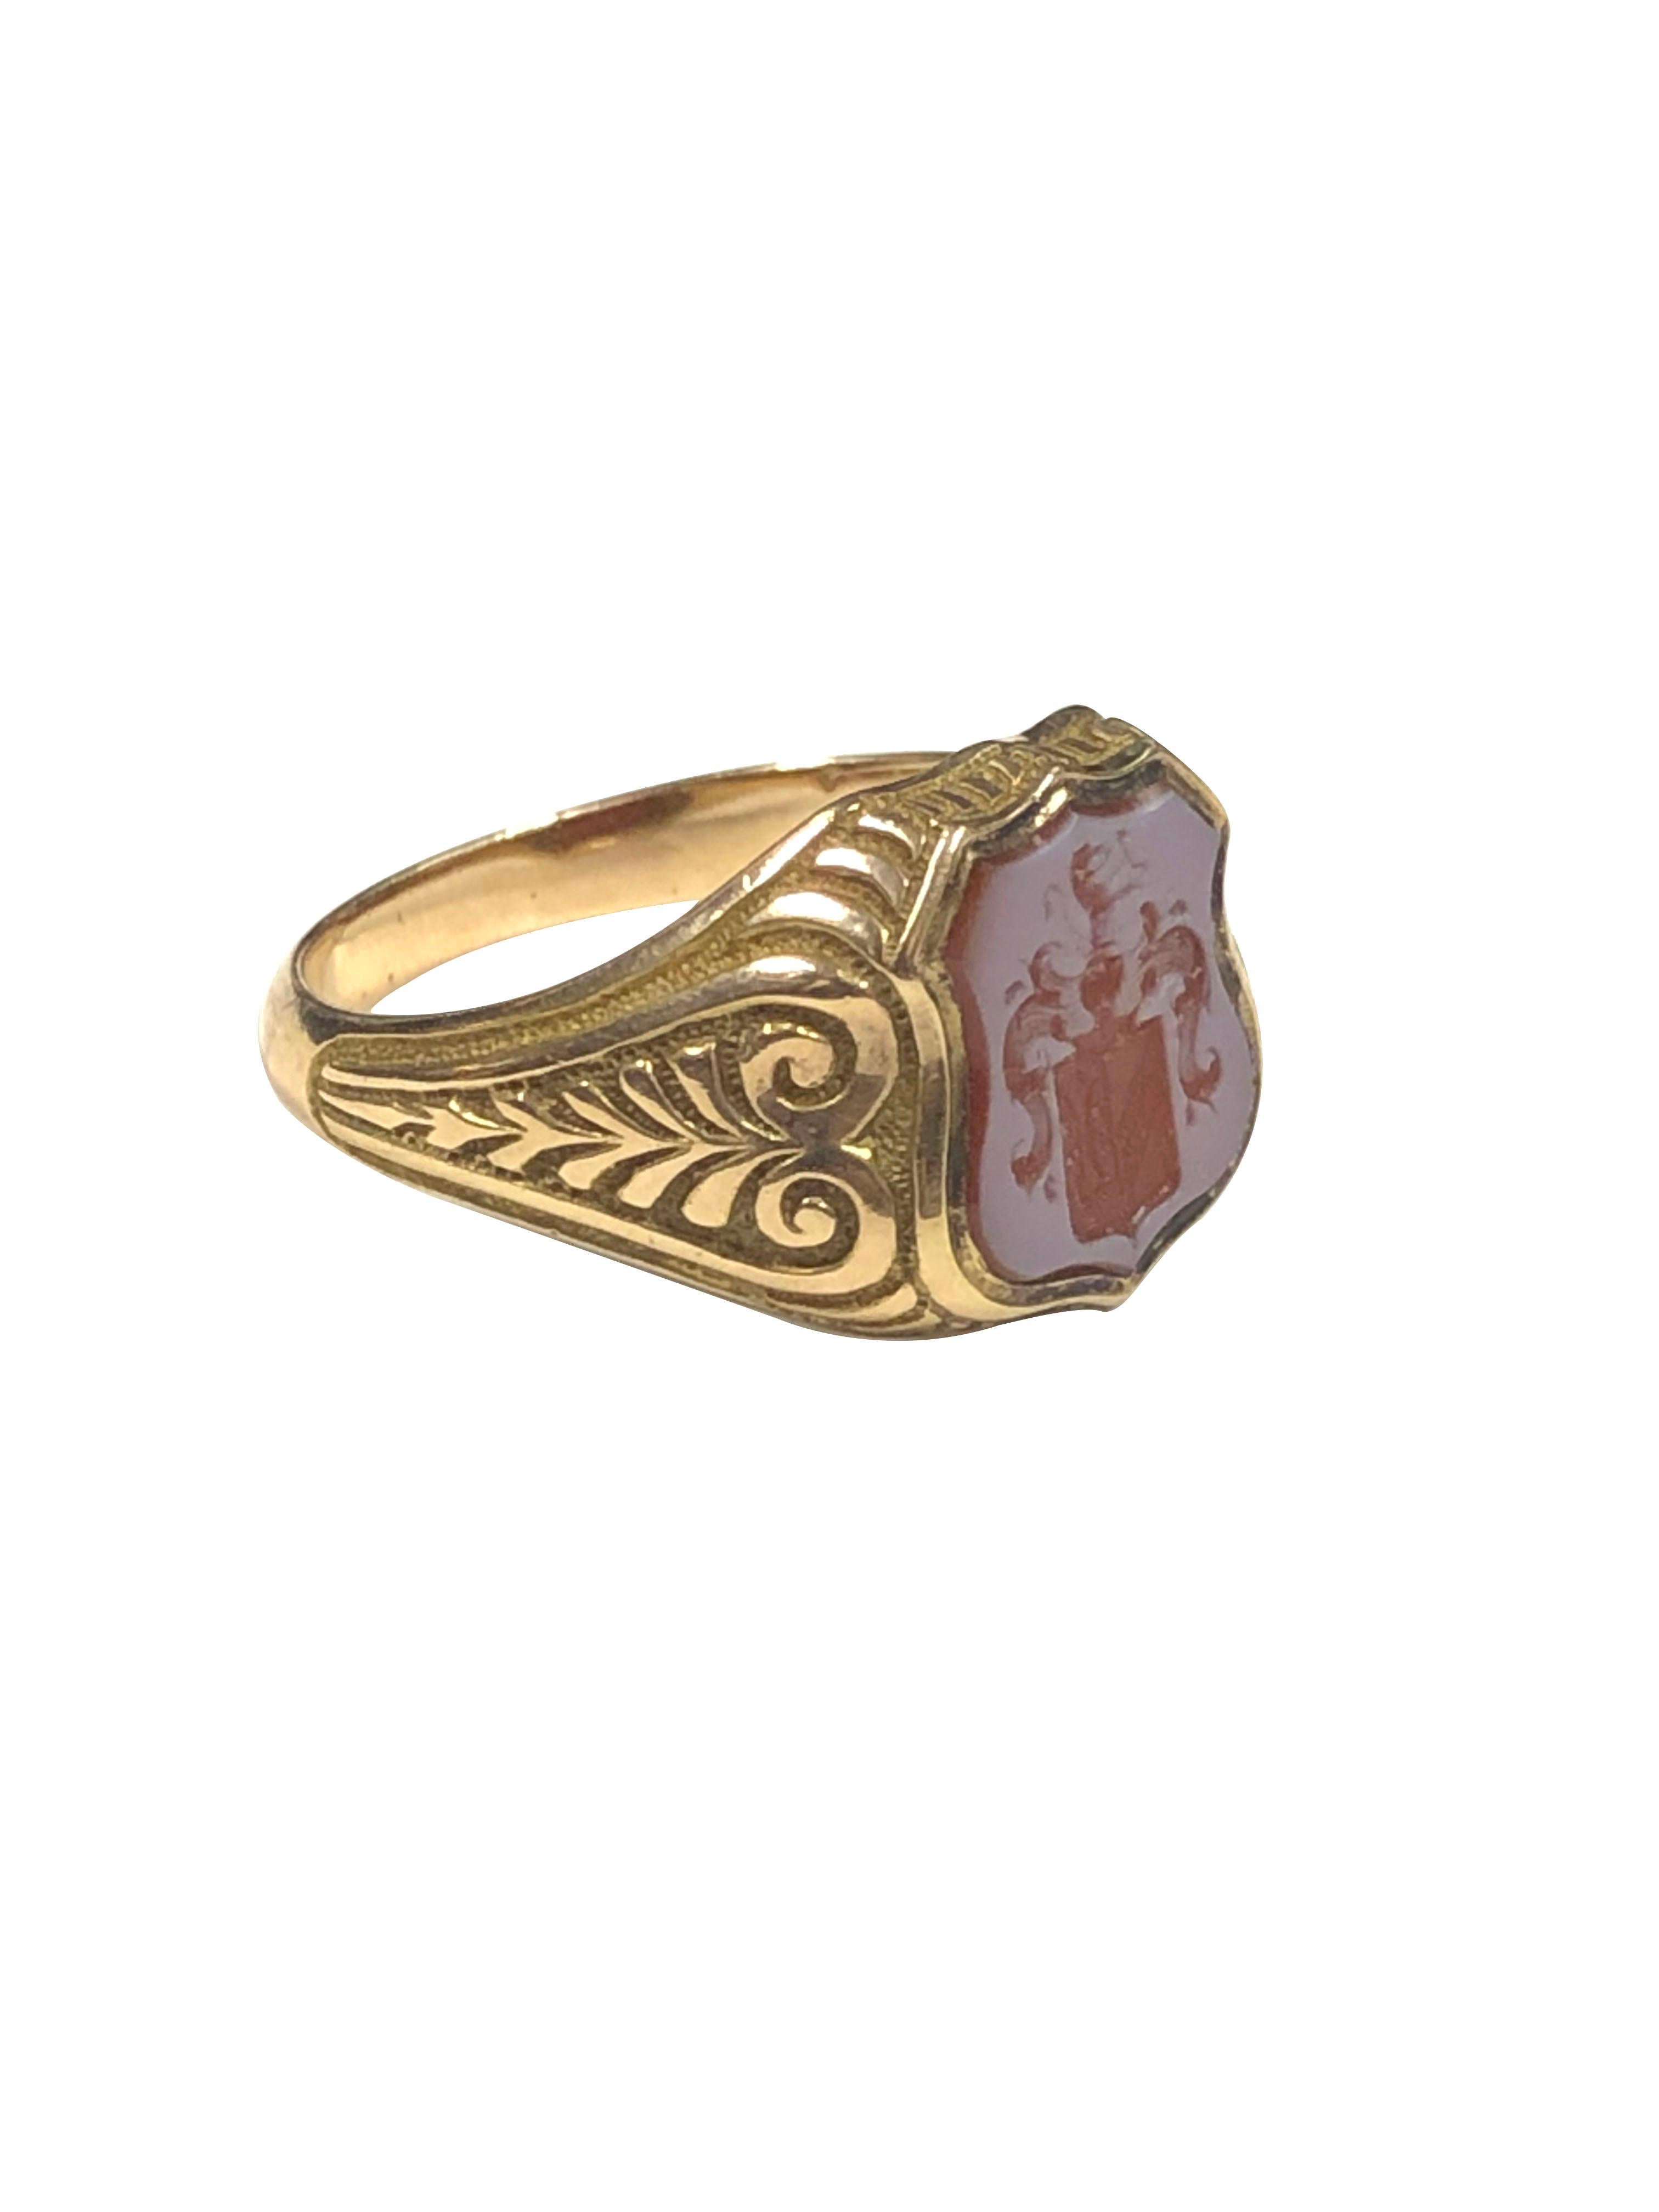 Cabochon Fine Antique Gold and Shield Shape Agate Signet Crest Ring 